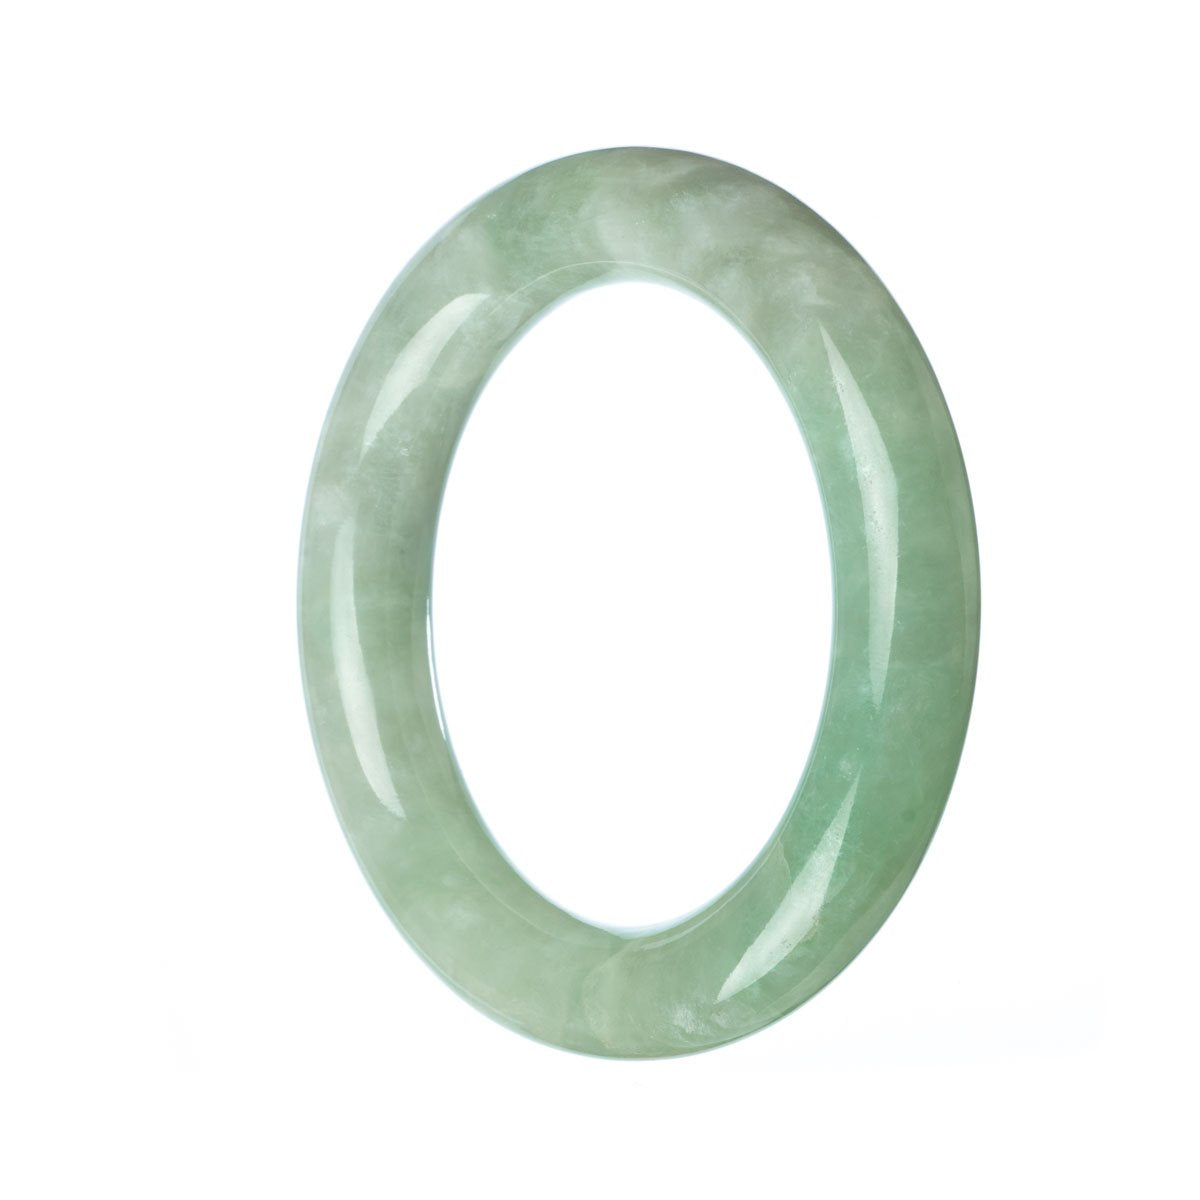 A round, untreated green jade bracelet with a traditional design, measuring 53mm in diameter. Made by Mays Gems.